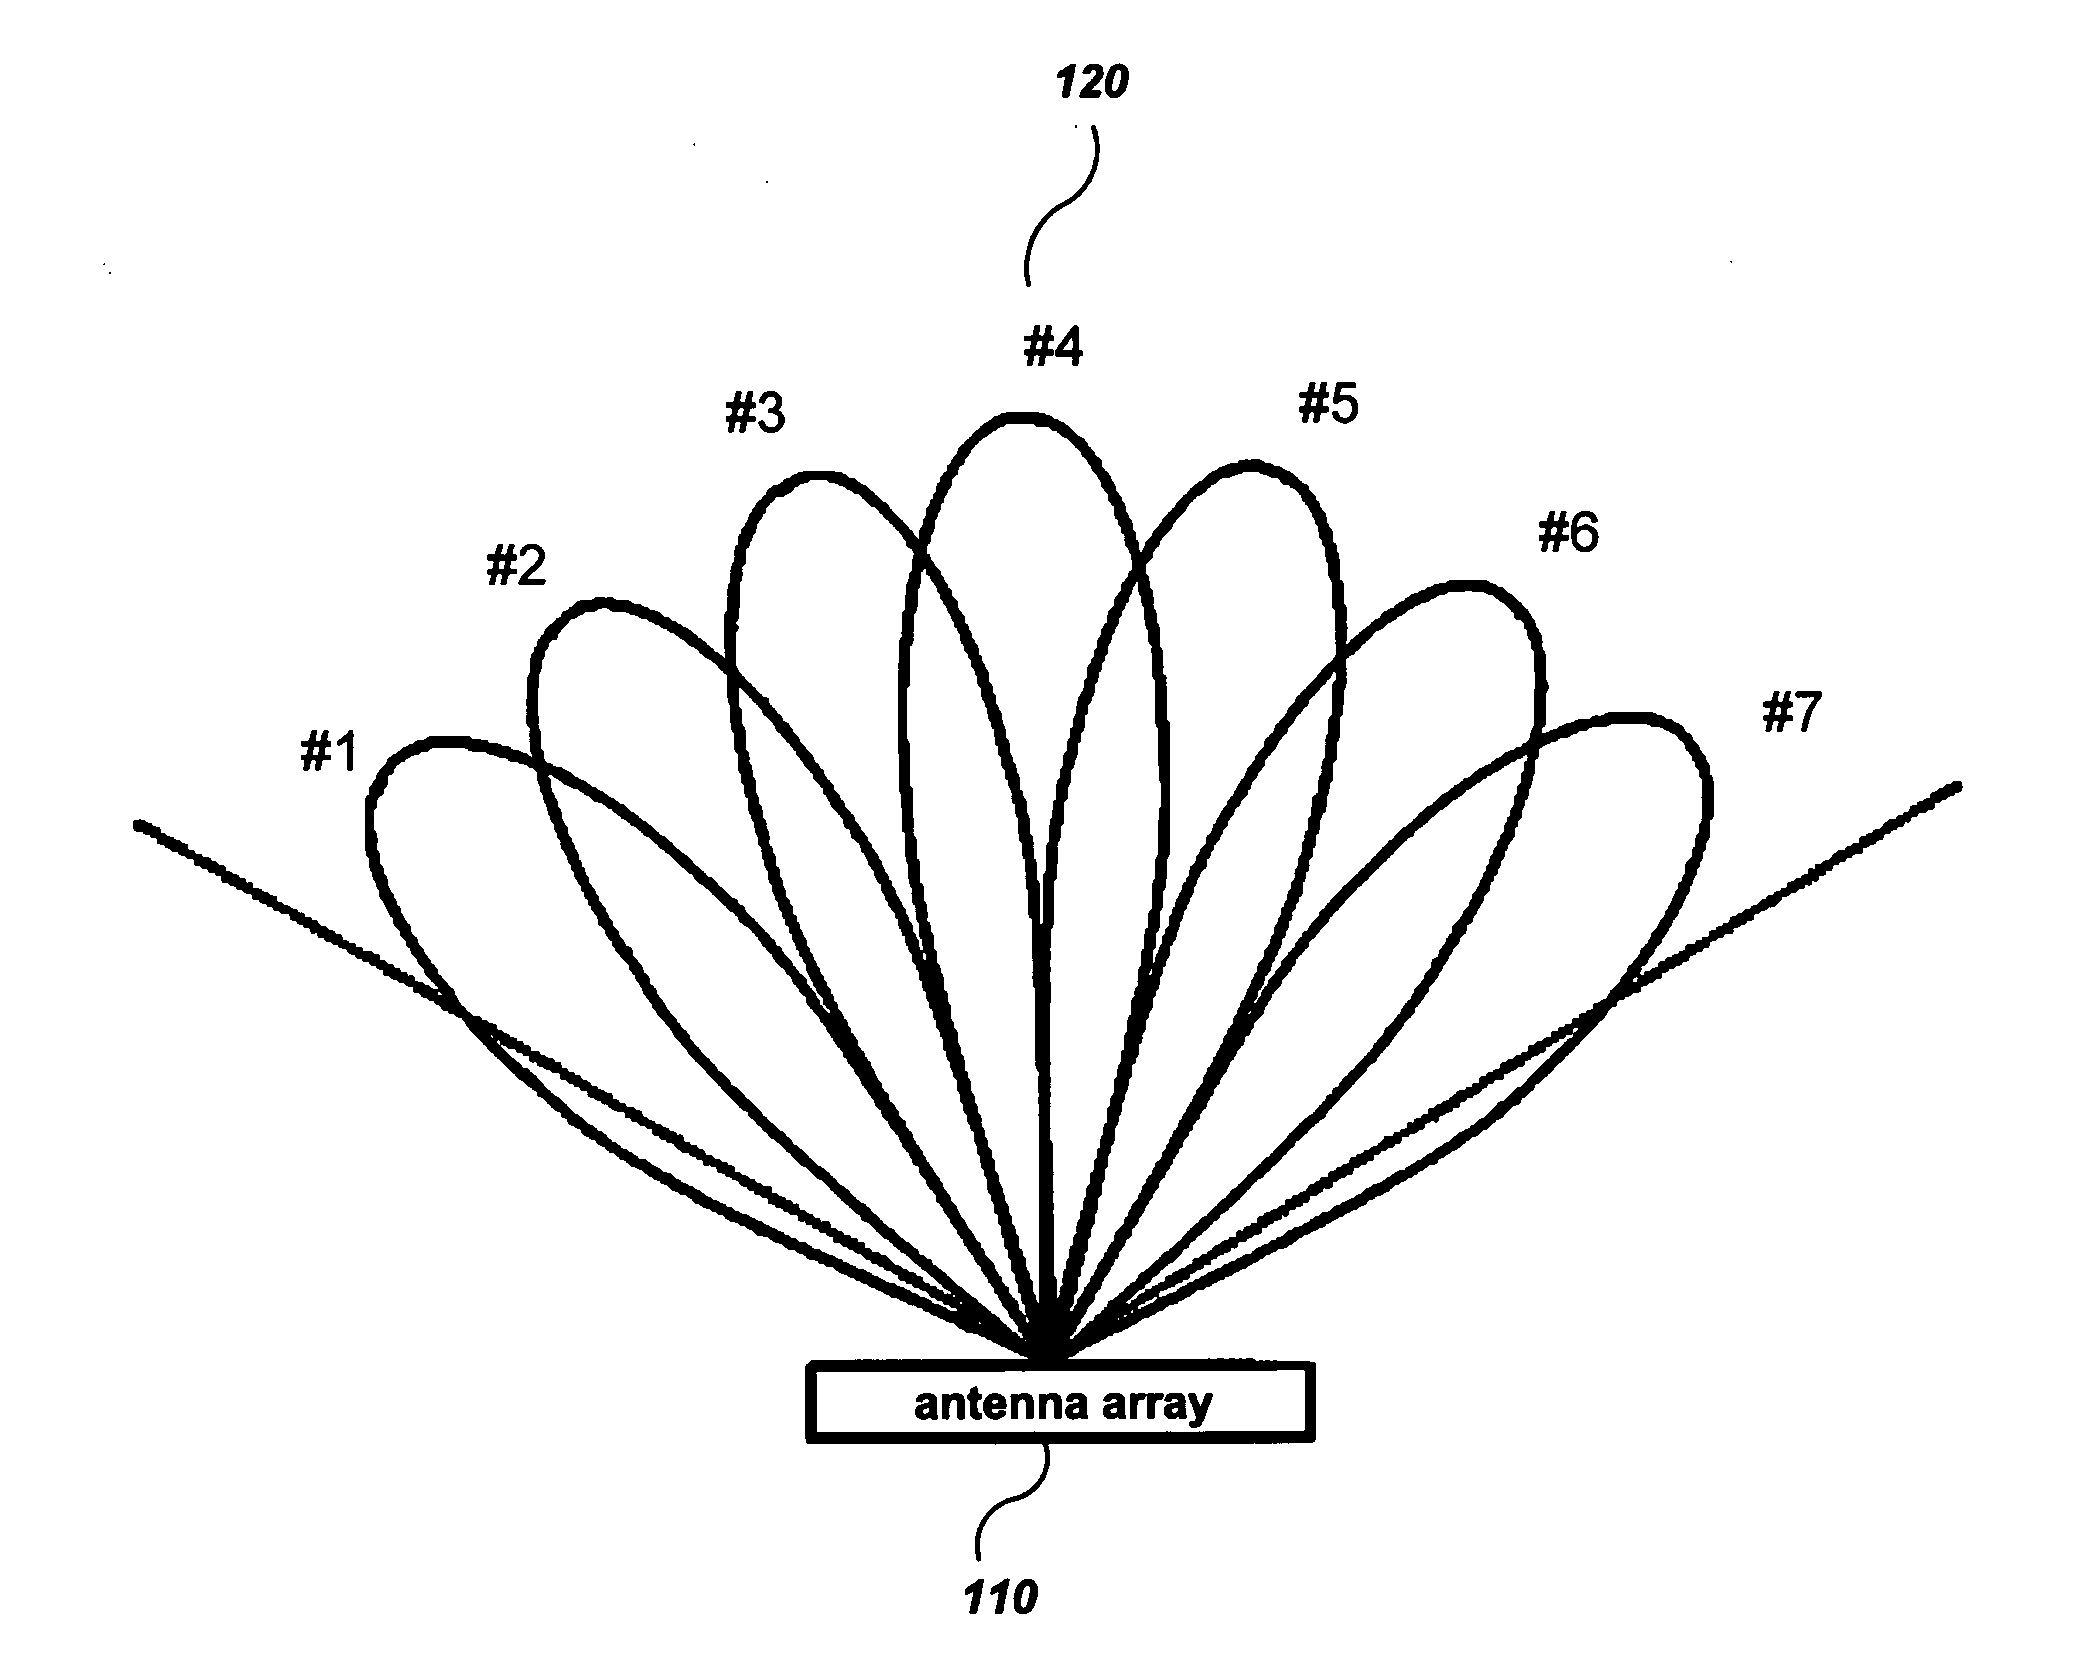 Transceiver for a base station with smart antenna and a switched beamforming method in downlink